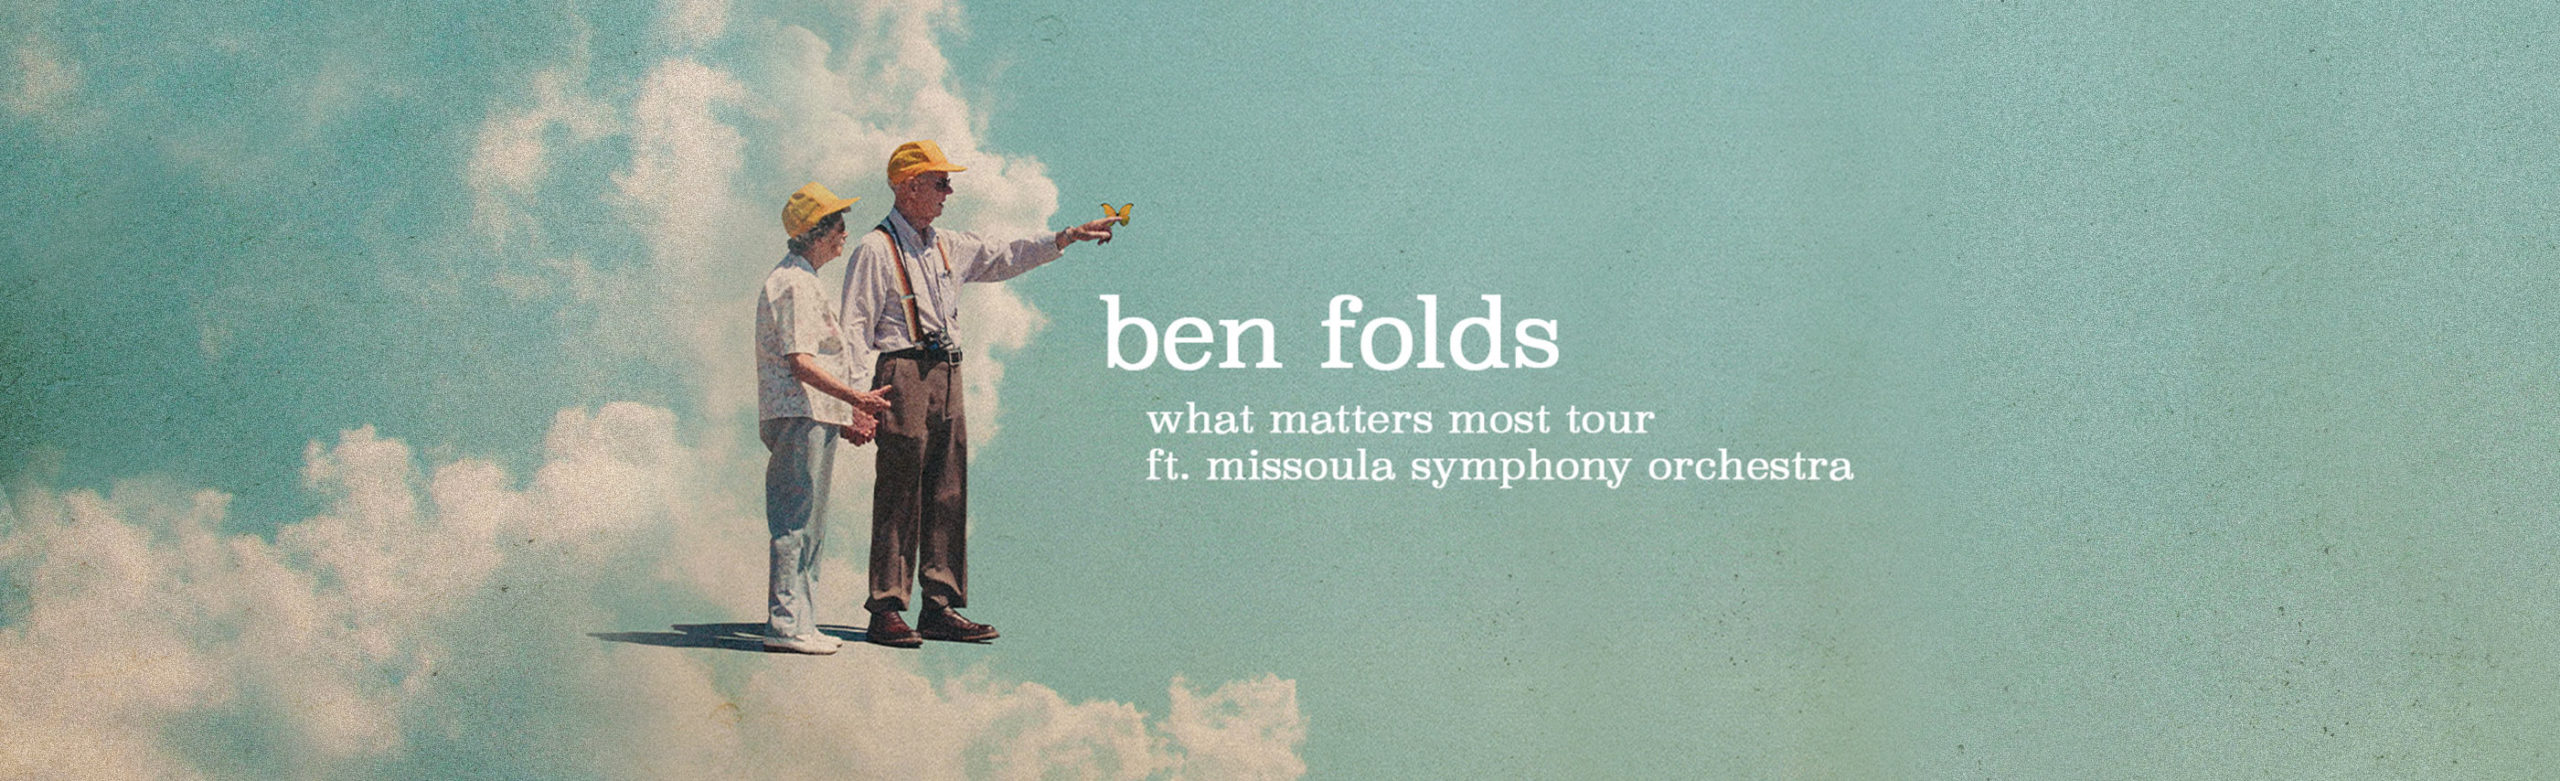 Ben Folds Announces Special Concert Featuring Missoula Symphony Orchestra at KettleHouse Amphitheater Image